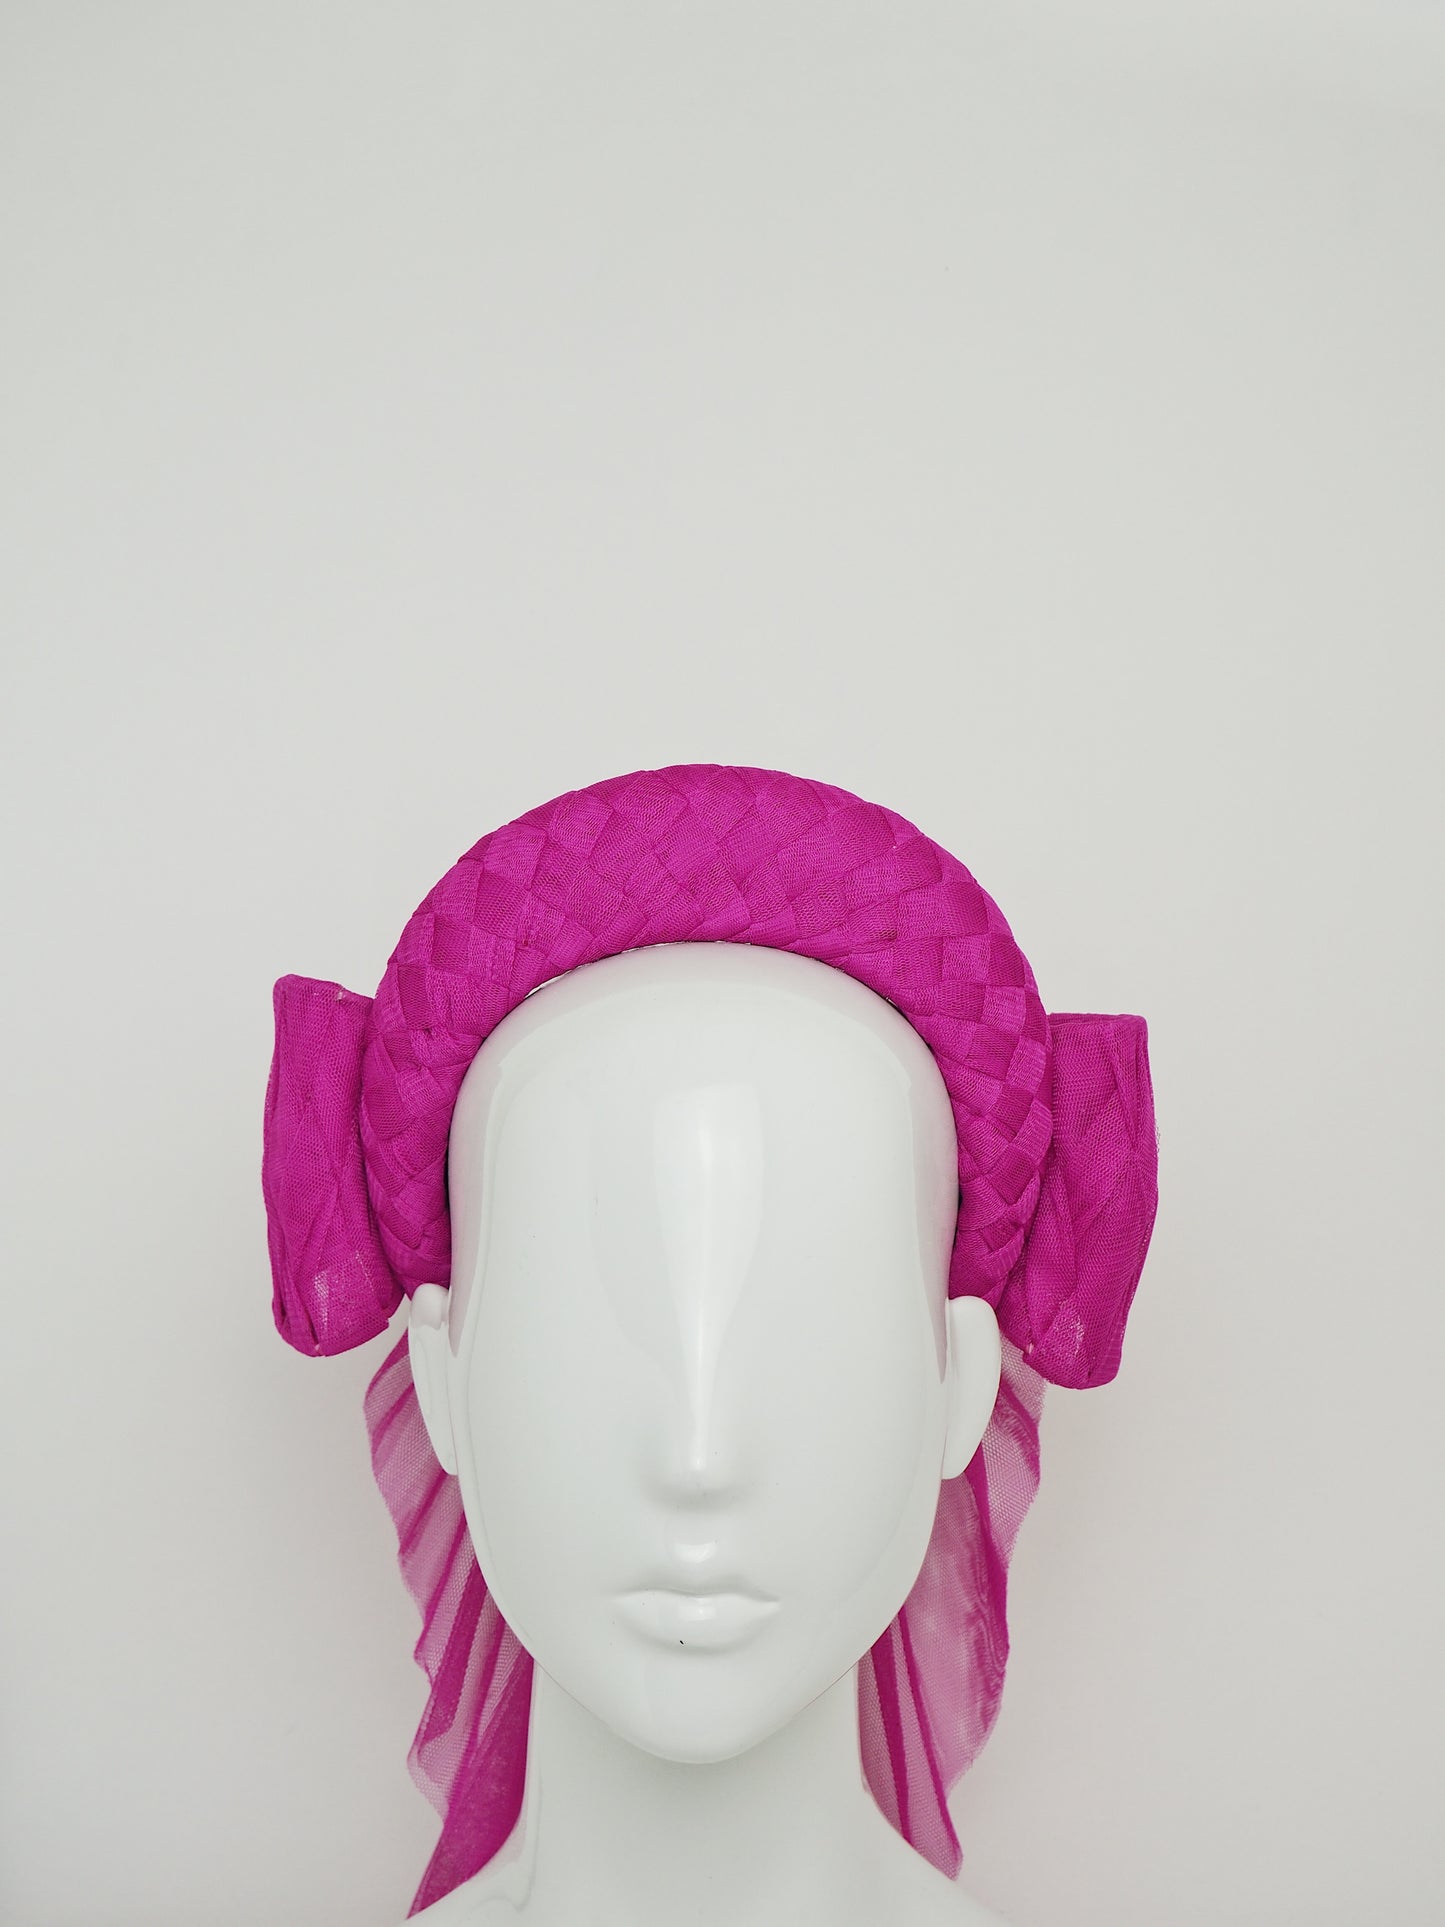 Hot To Trot - Woven pink tulle 3d headband with rear facing bow.